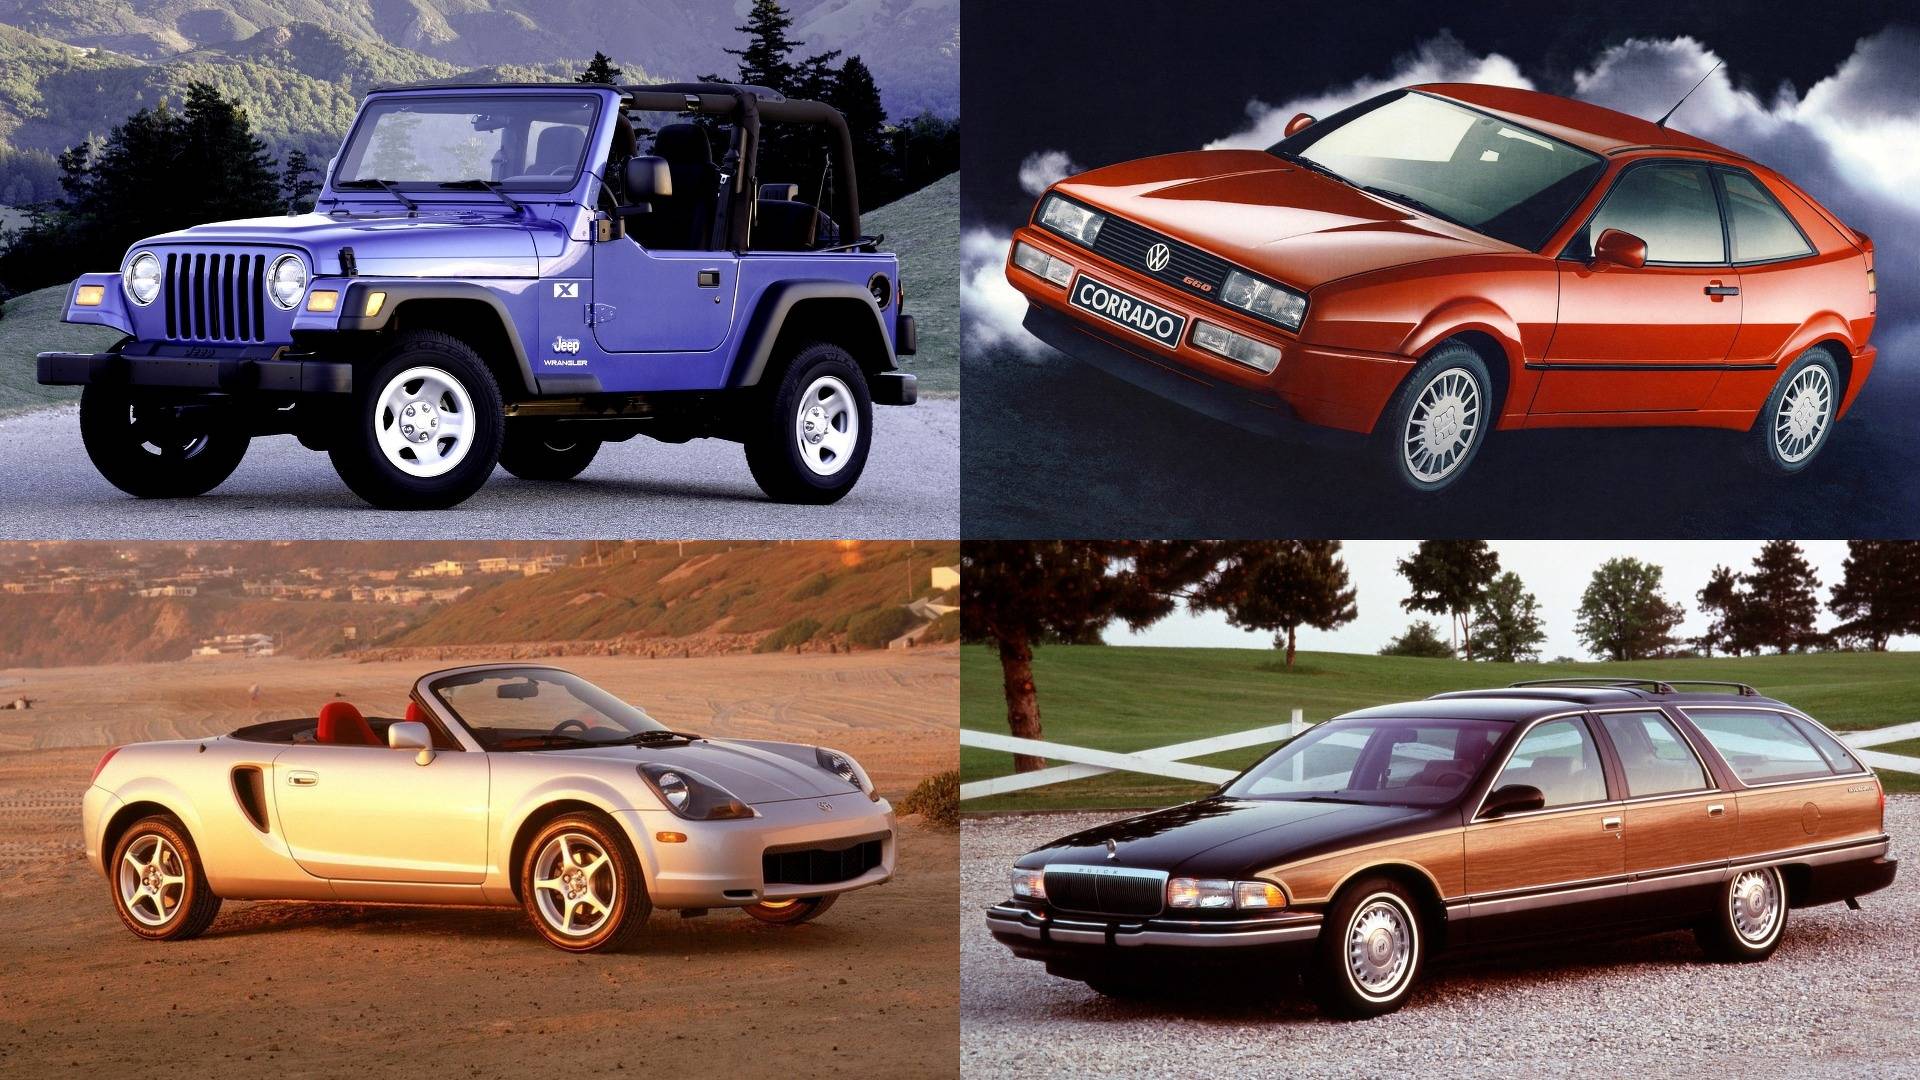 The Coolest Cars You Can Buy For $5000